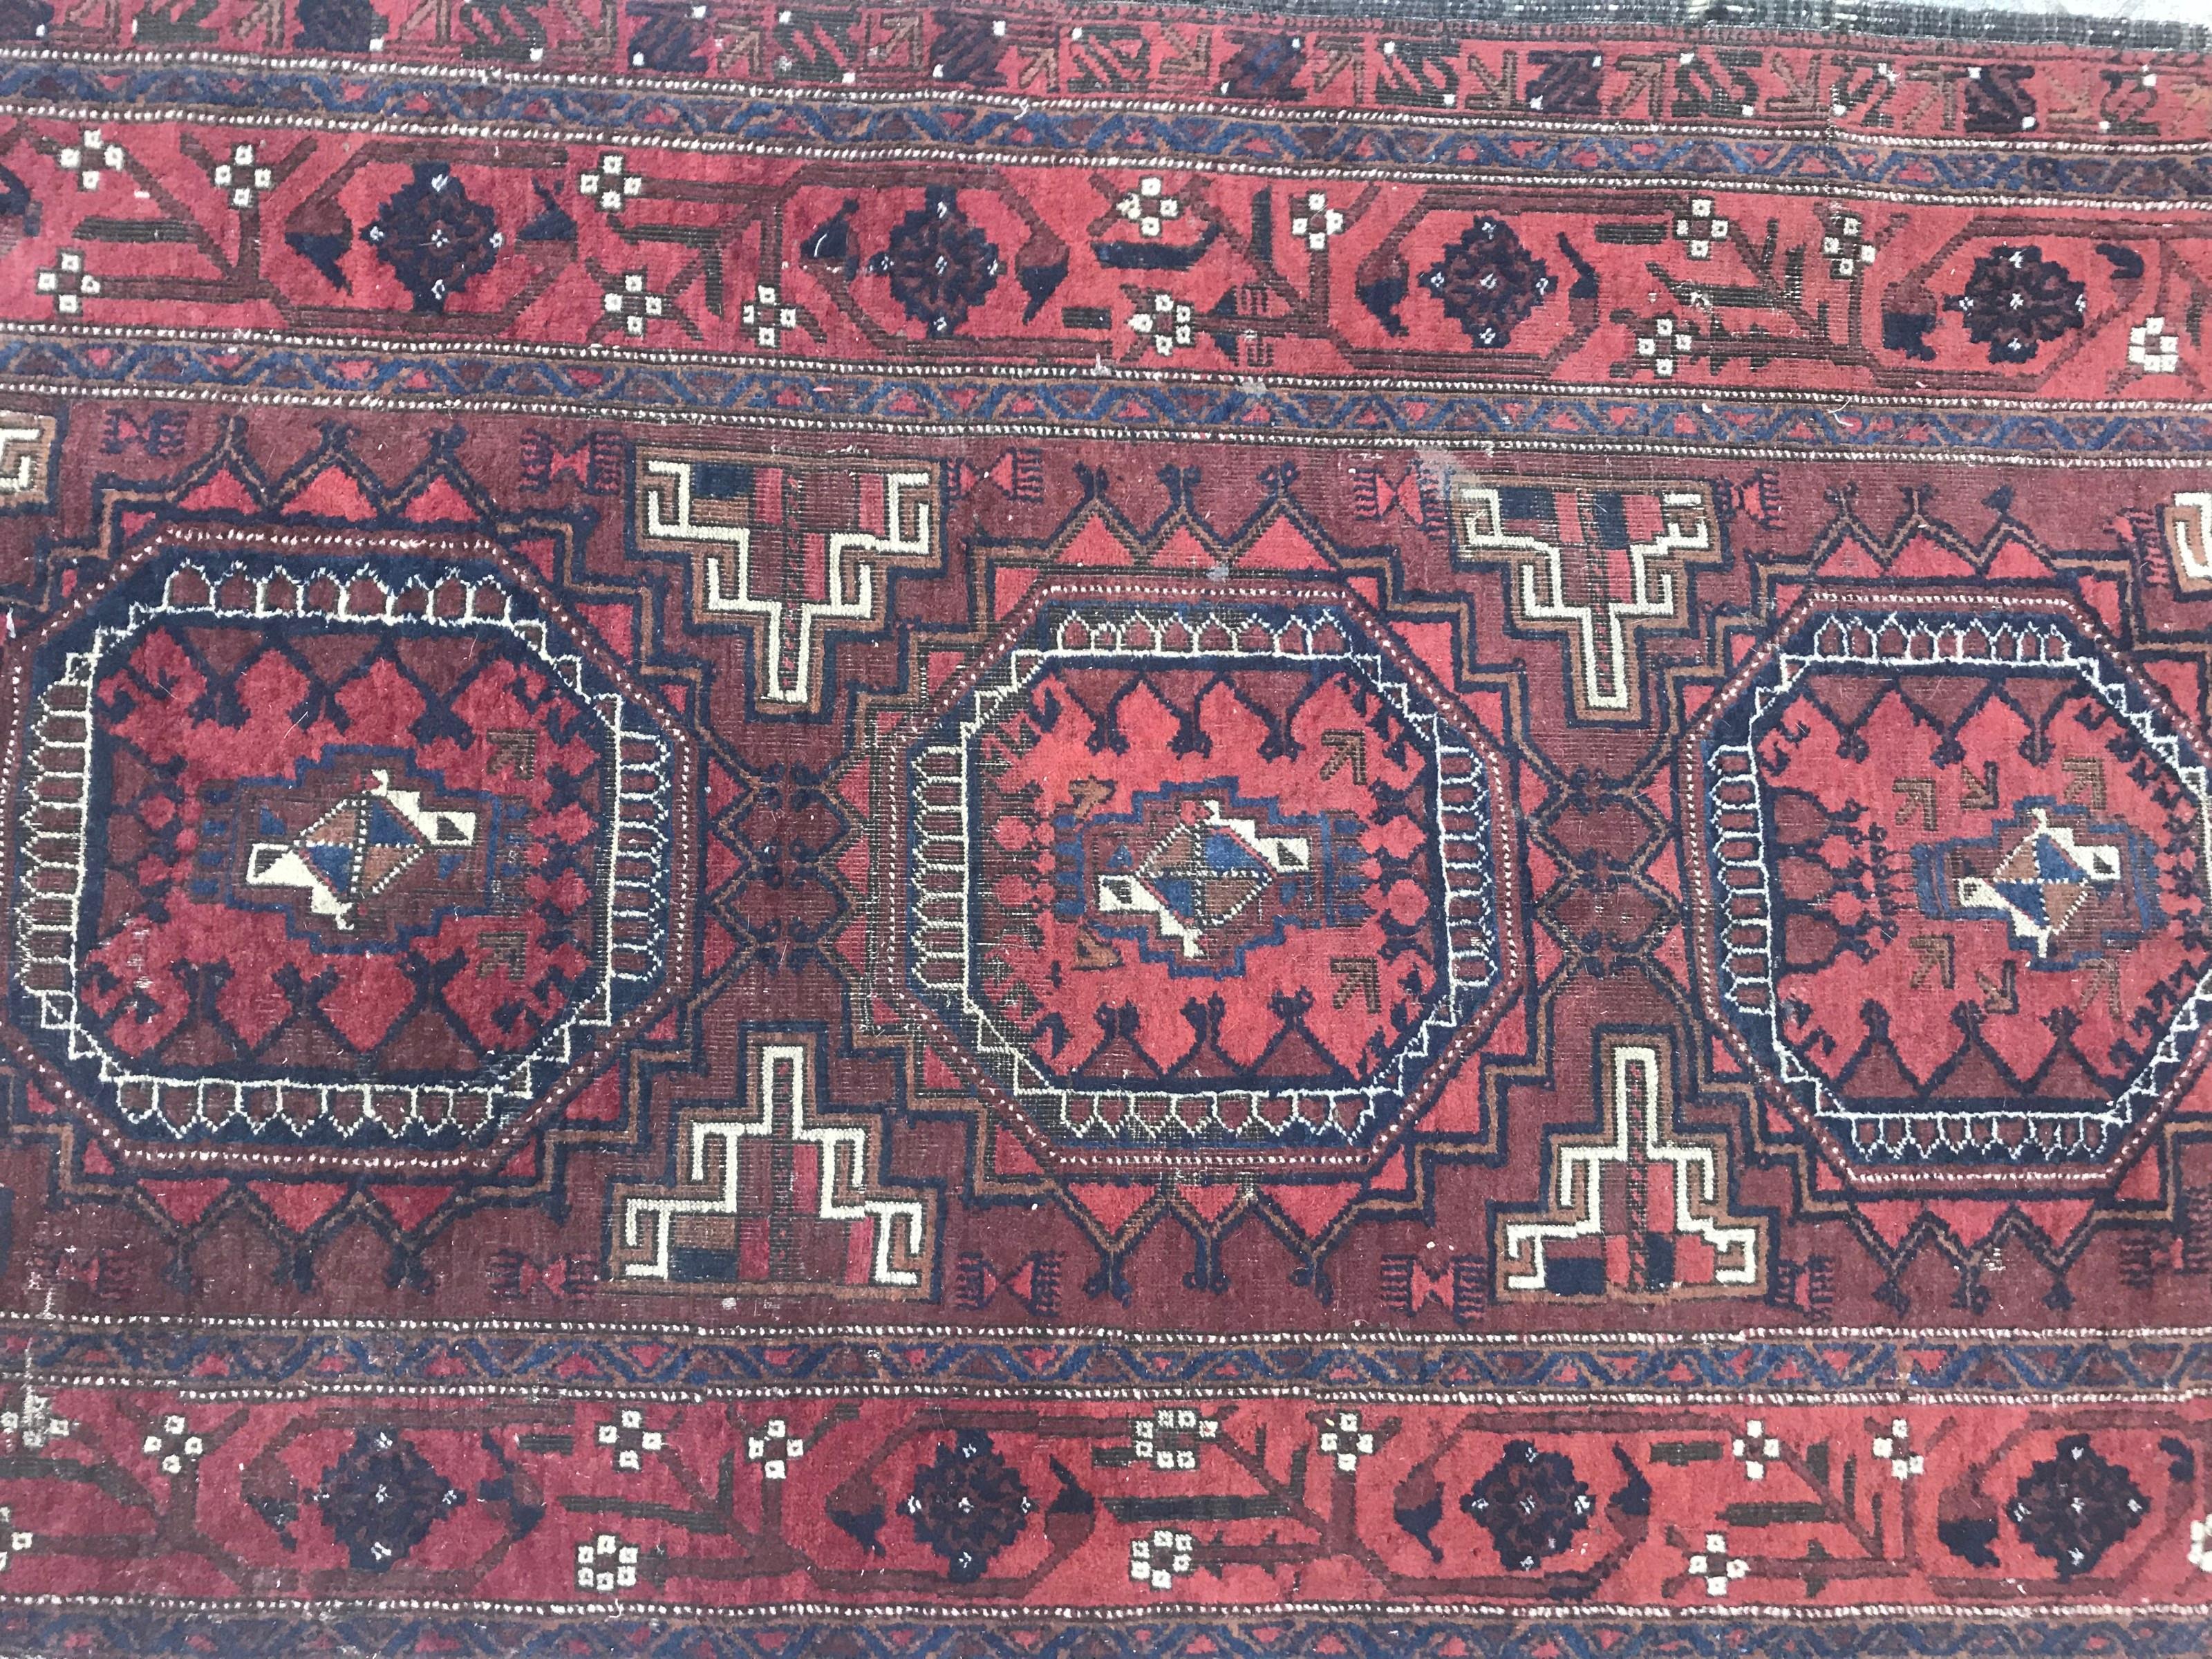 19th century collectible balutch Turkmen rug with a beautiful geometrical design and natural colors with brown, red, pink, blue and black, finely hand knotted with wool velvet on wool foundation.

✨✨✨
